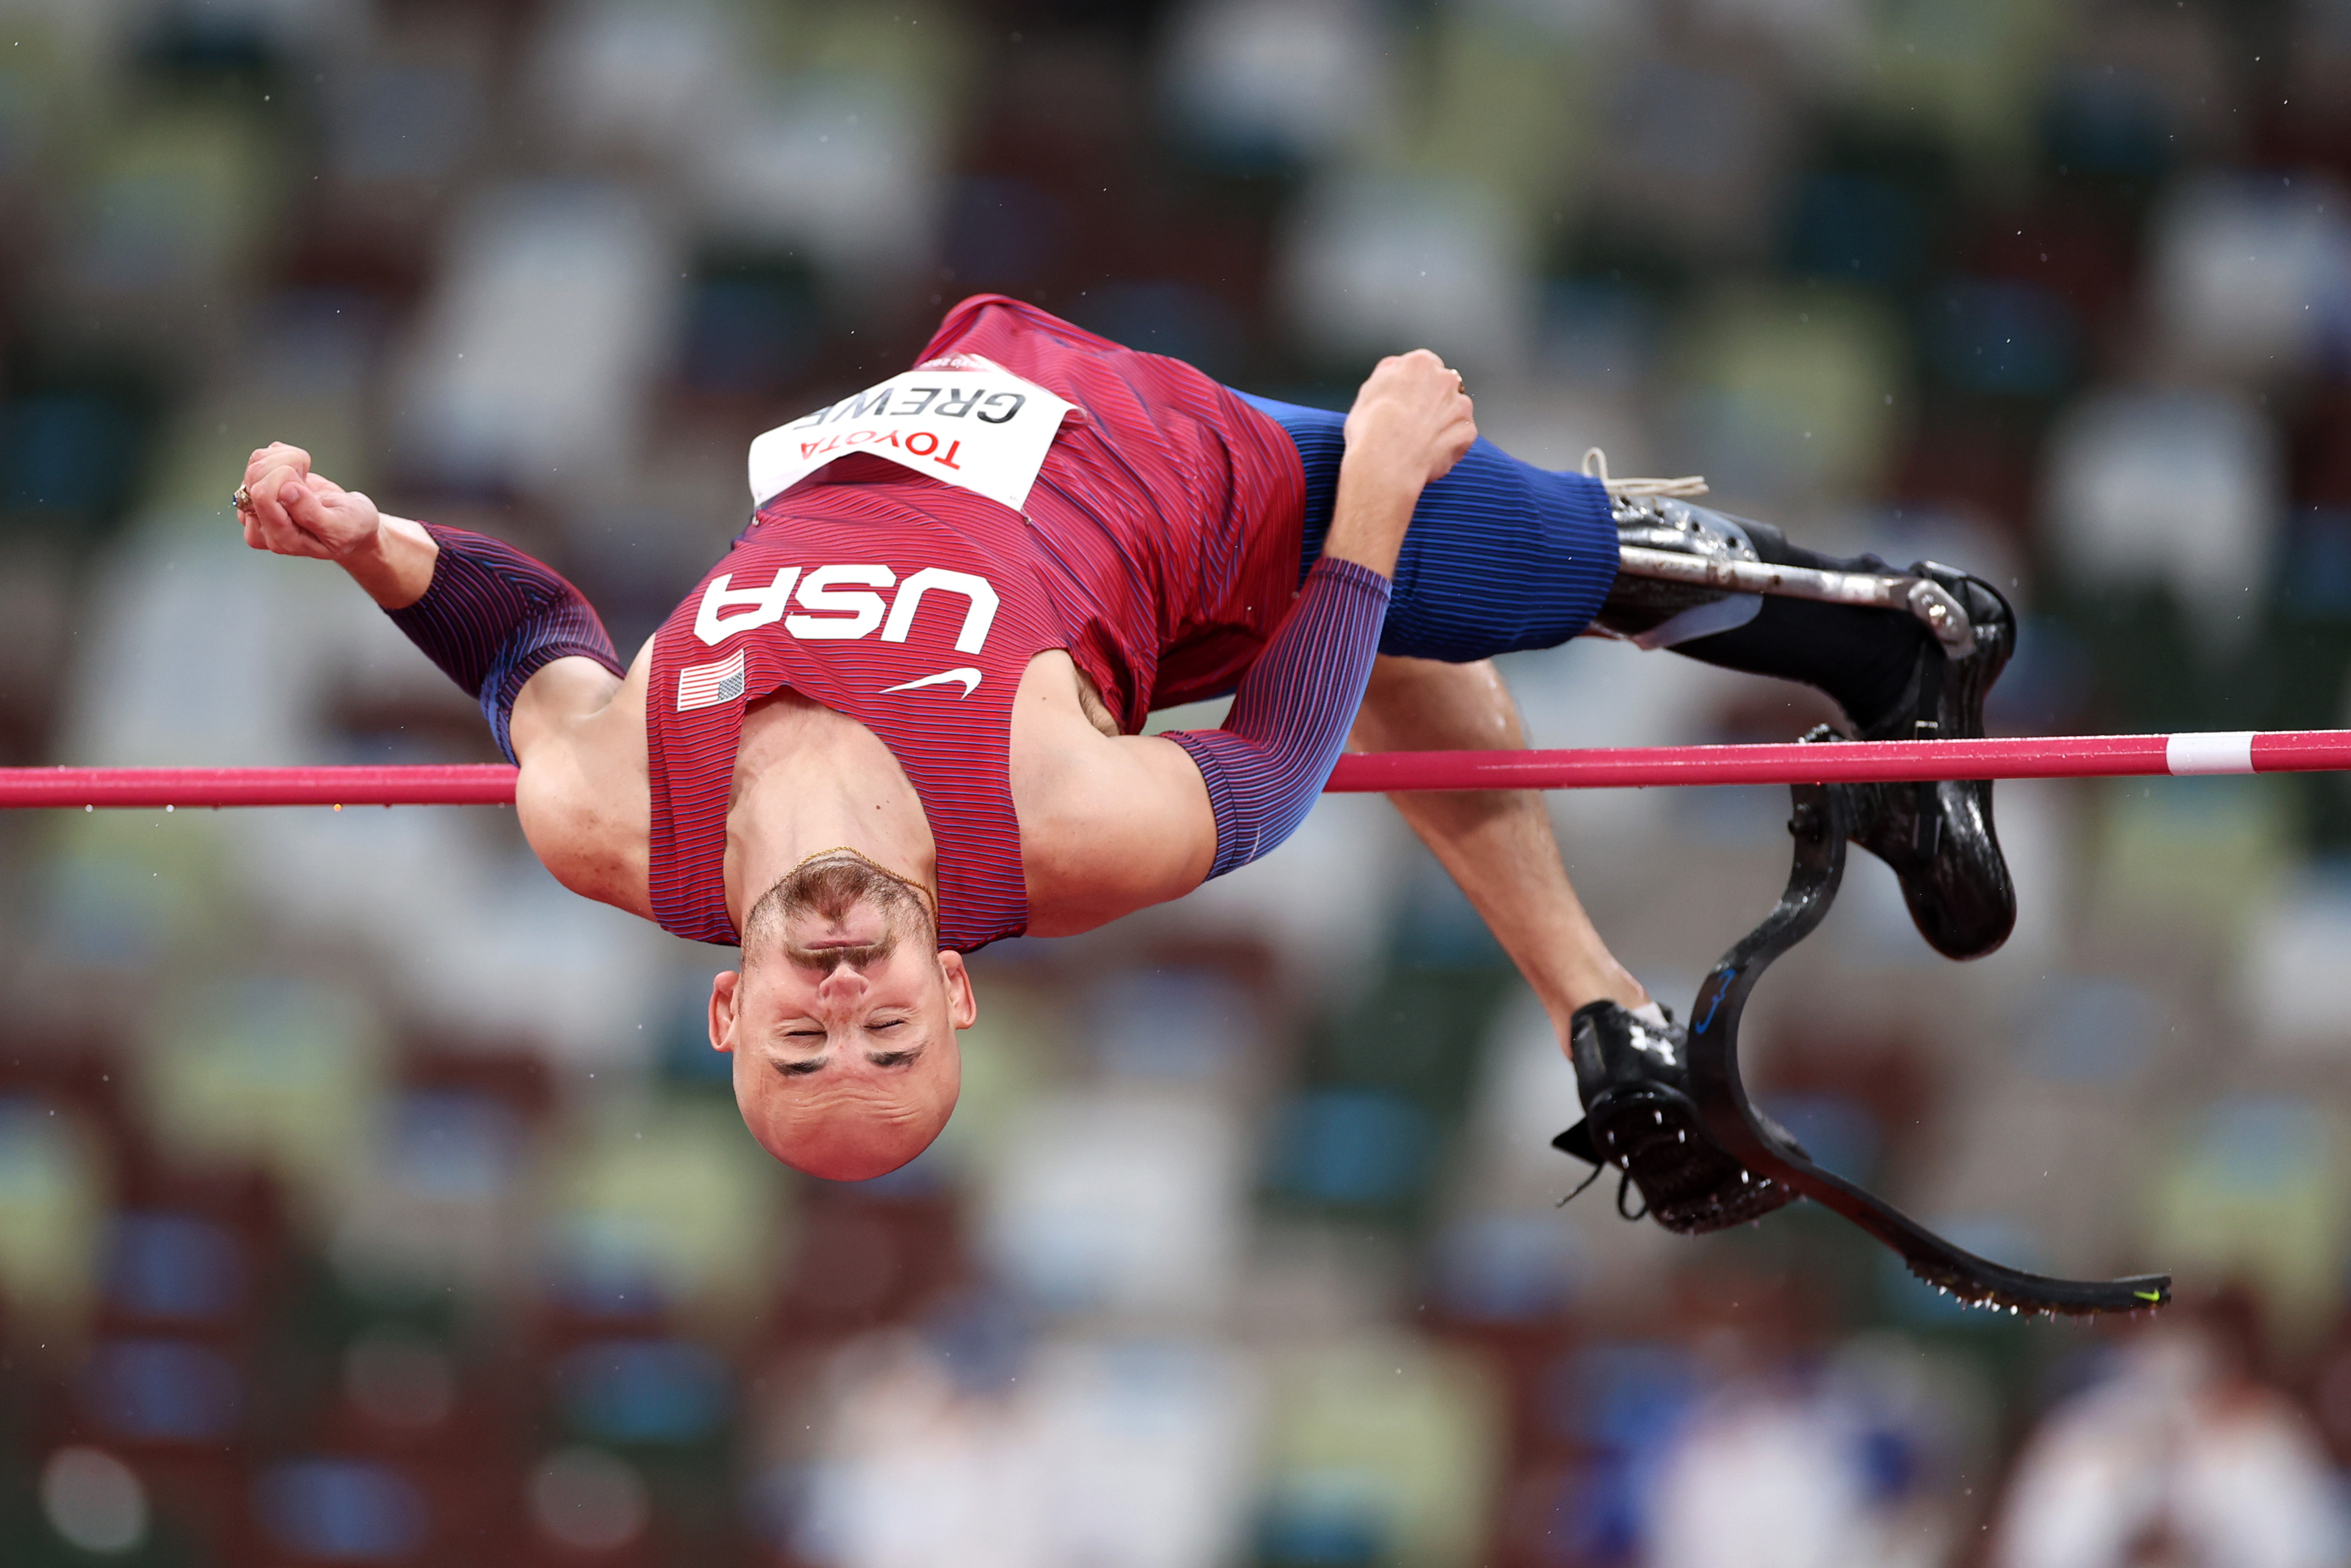 High jump is an easy obstacle for med school student Sam Grewe